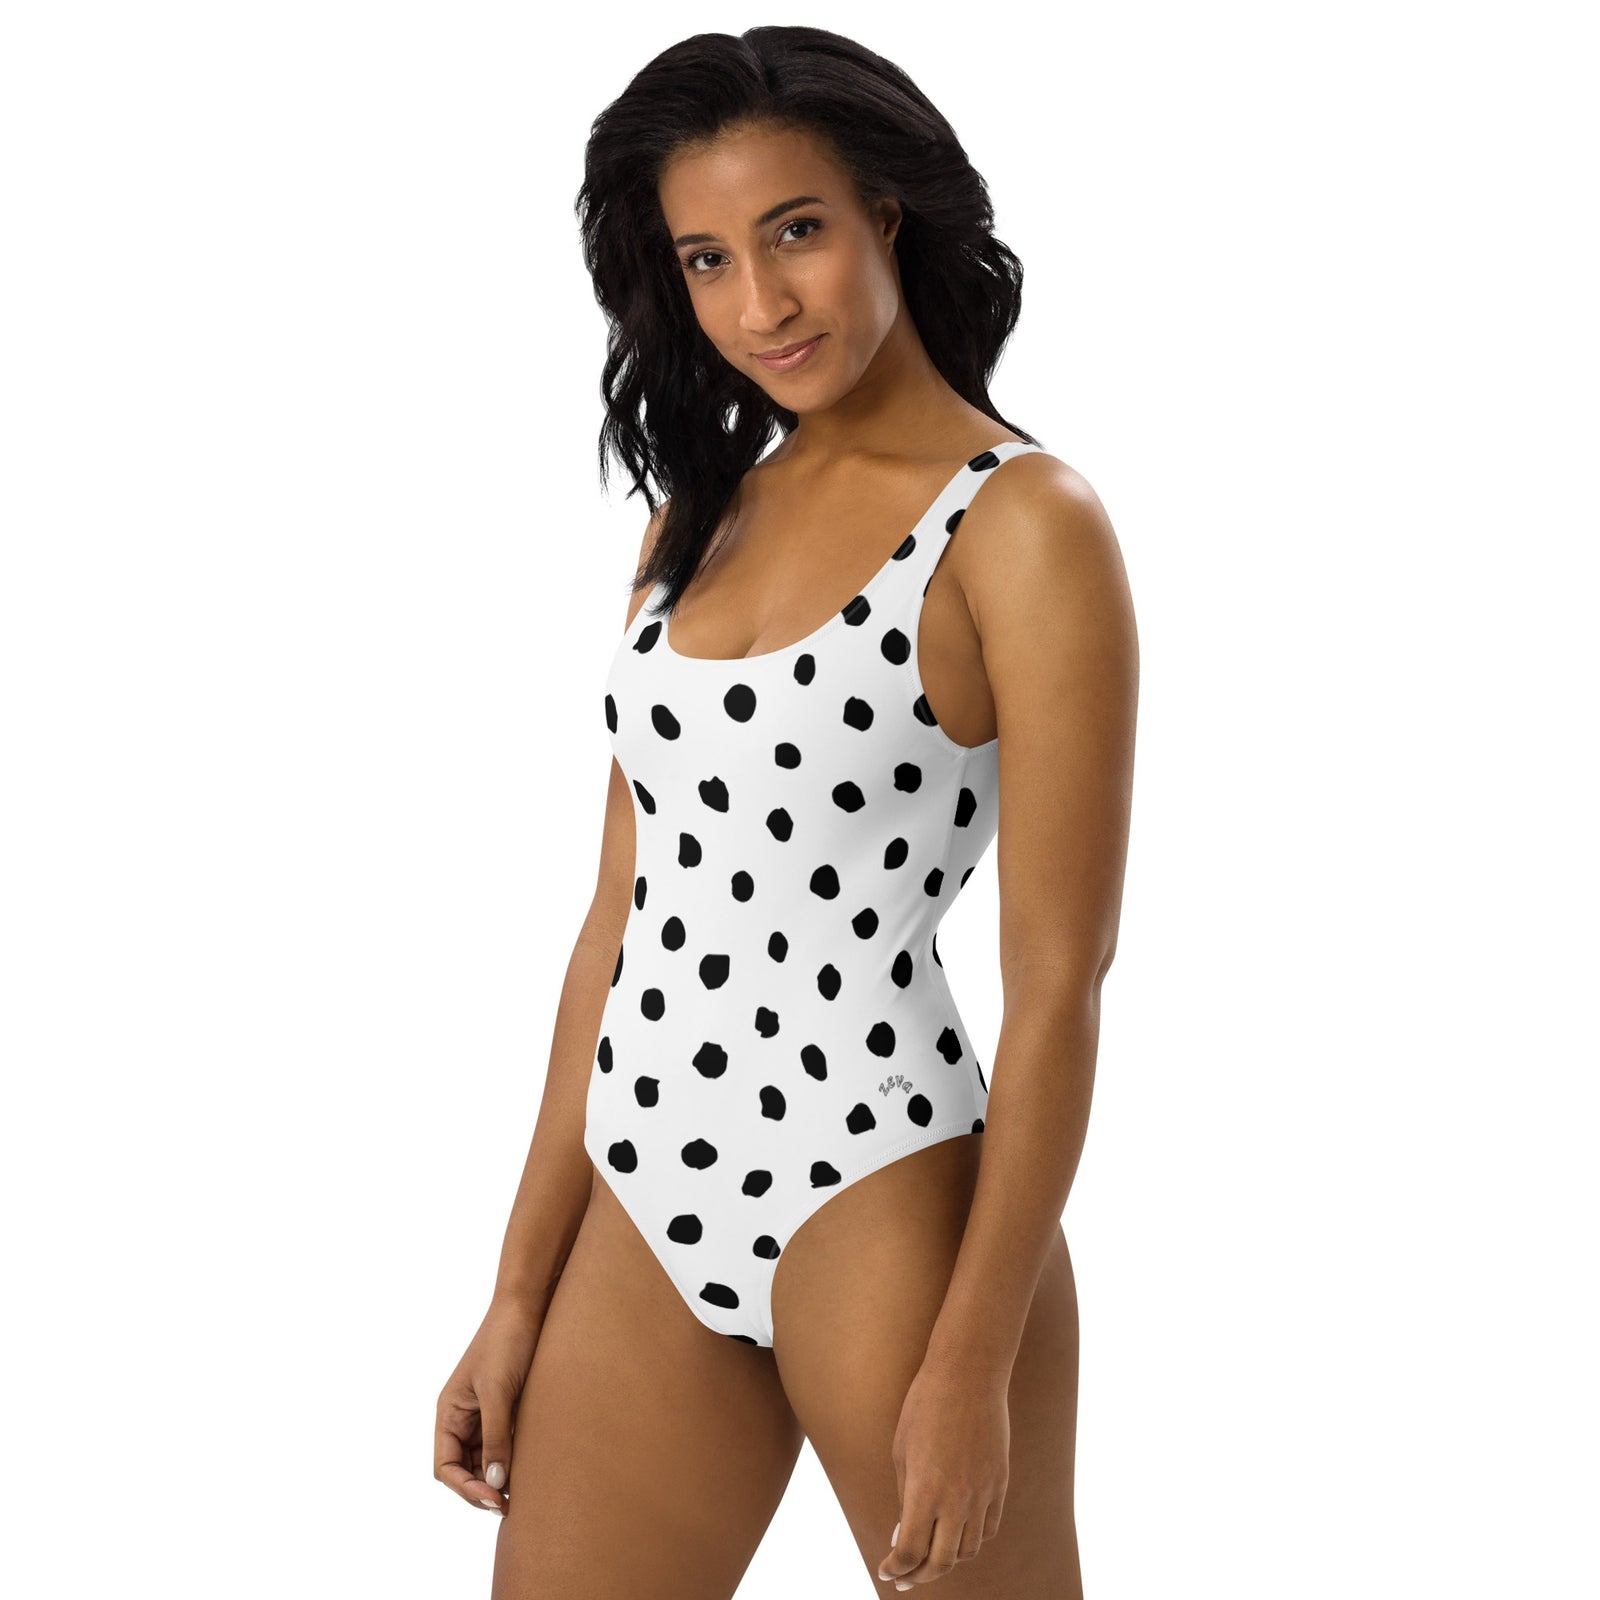 One-Piece Swimsuit in white with black poka dots, features scoop neckline and low cut back. Shop Zeva Swimwear today at Revive Wear.